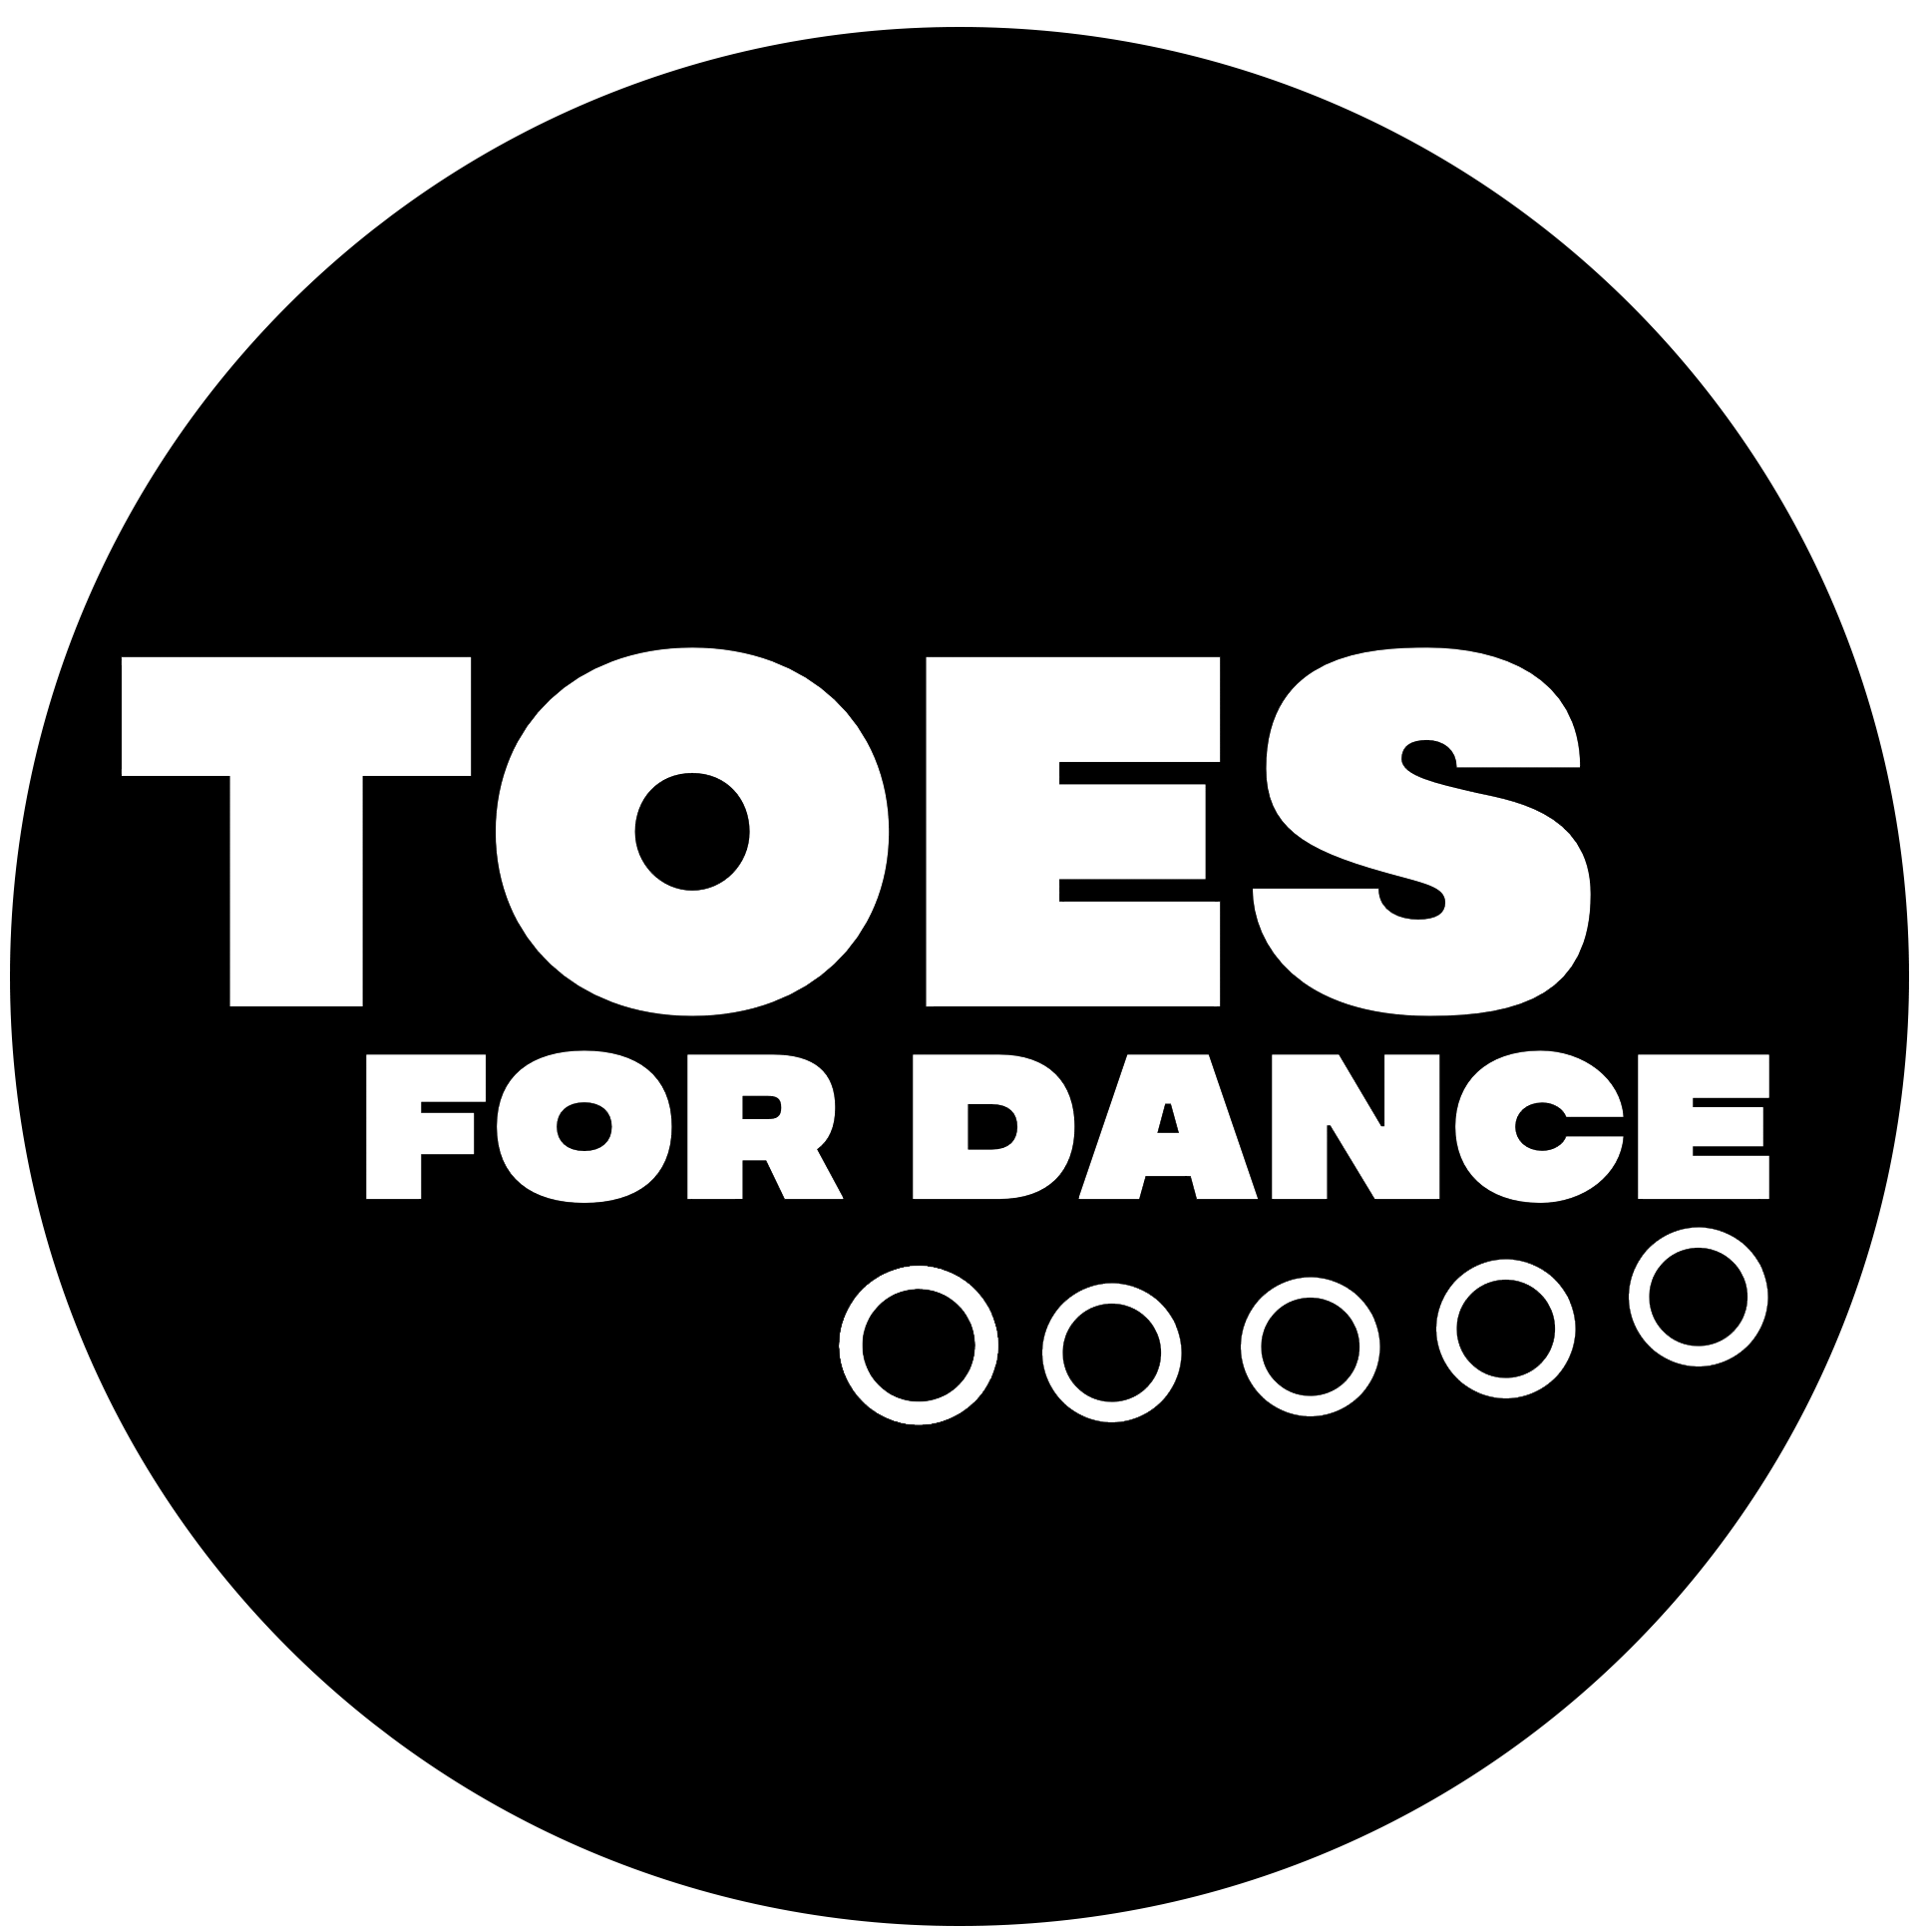 TOES FOR DANCE logo